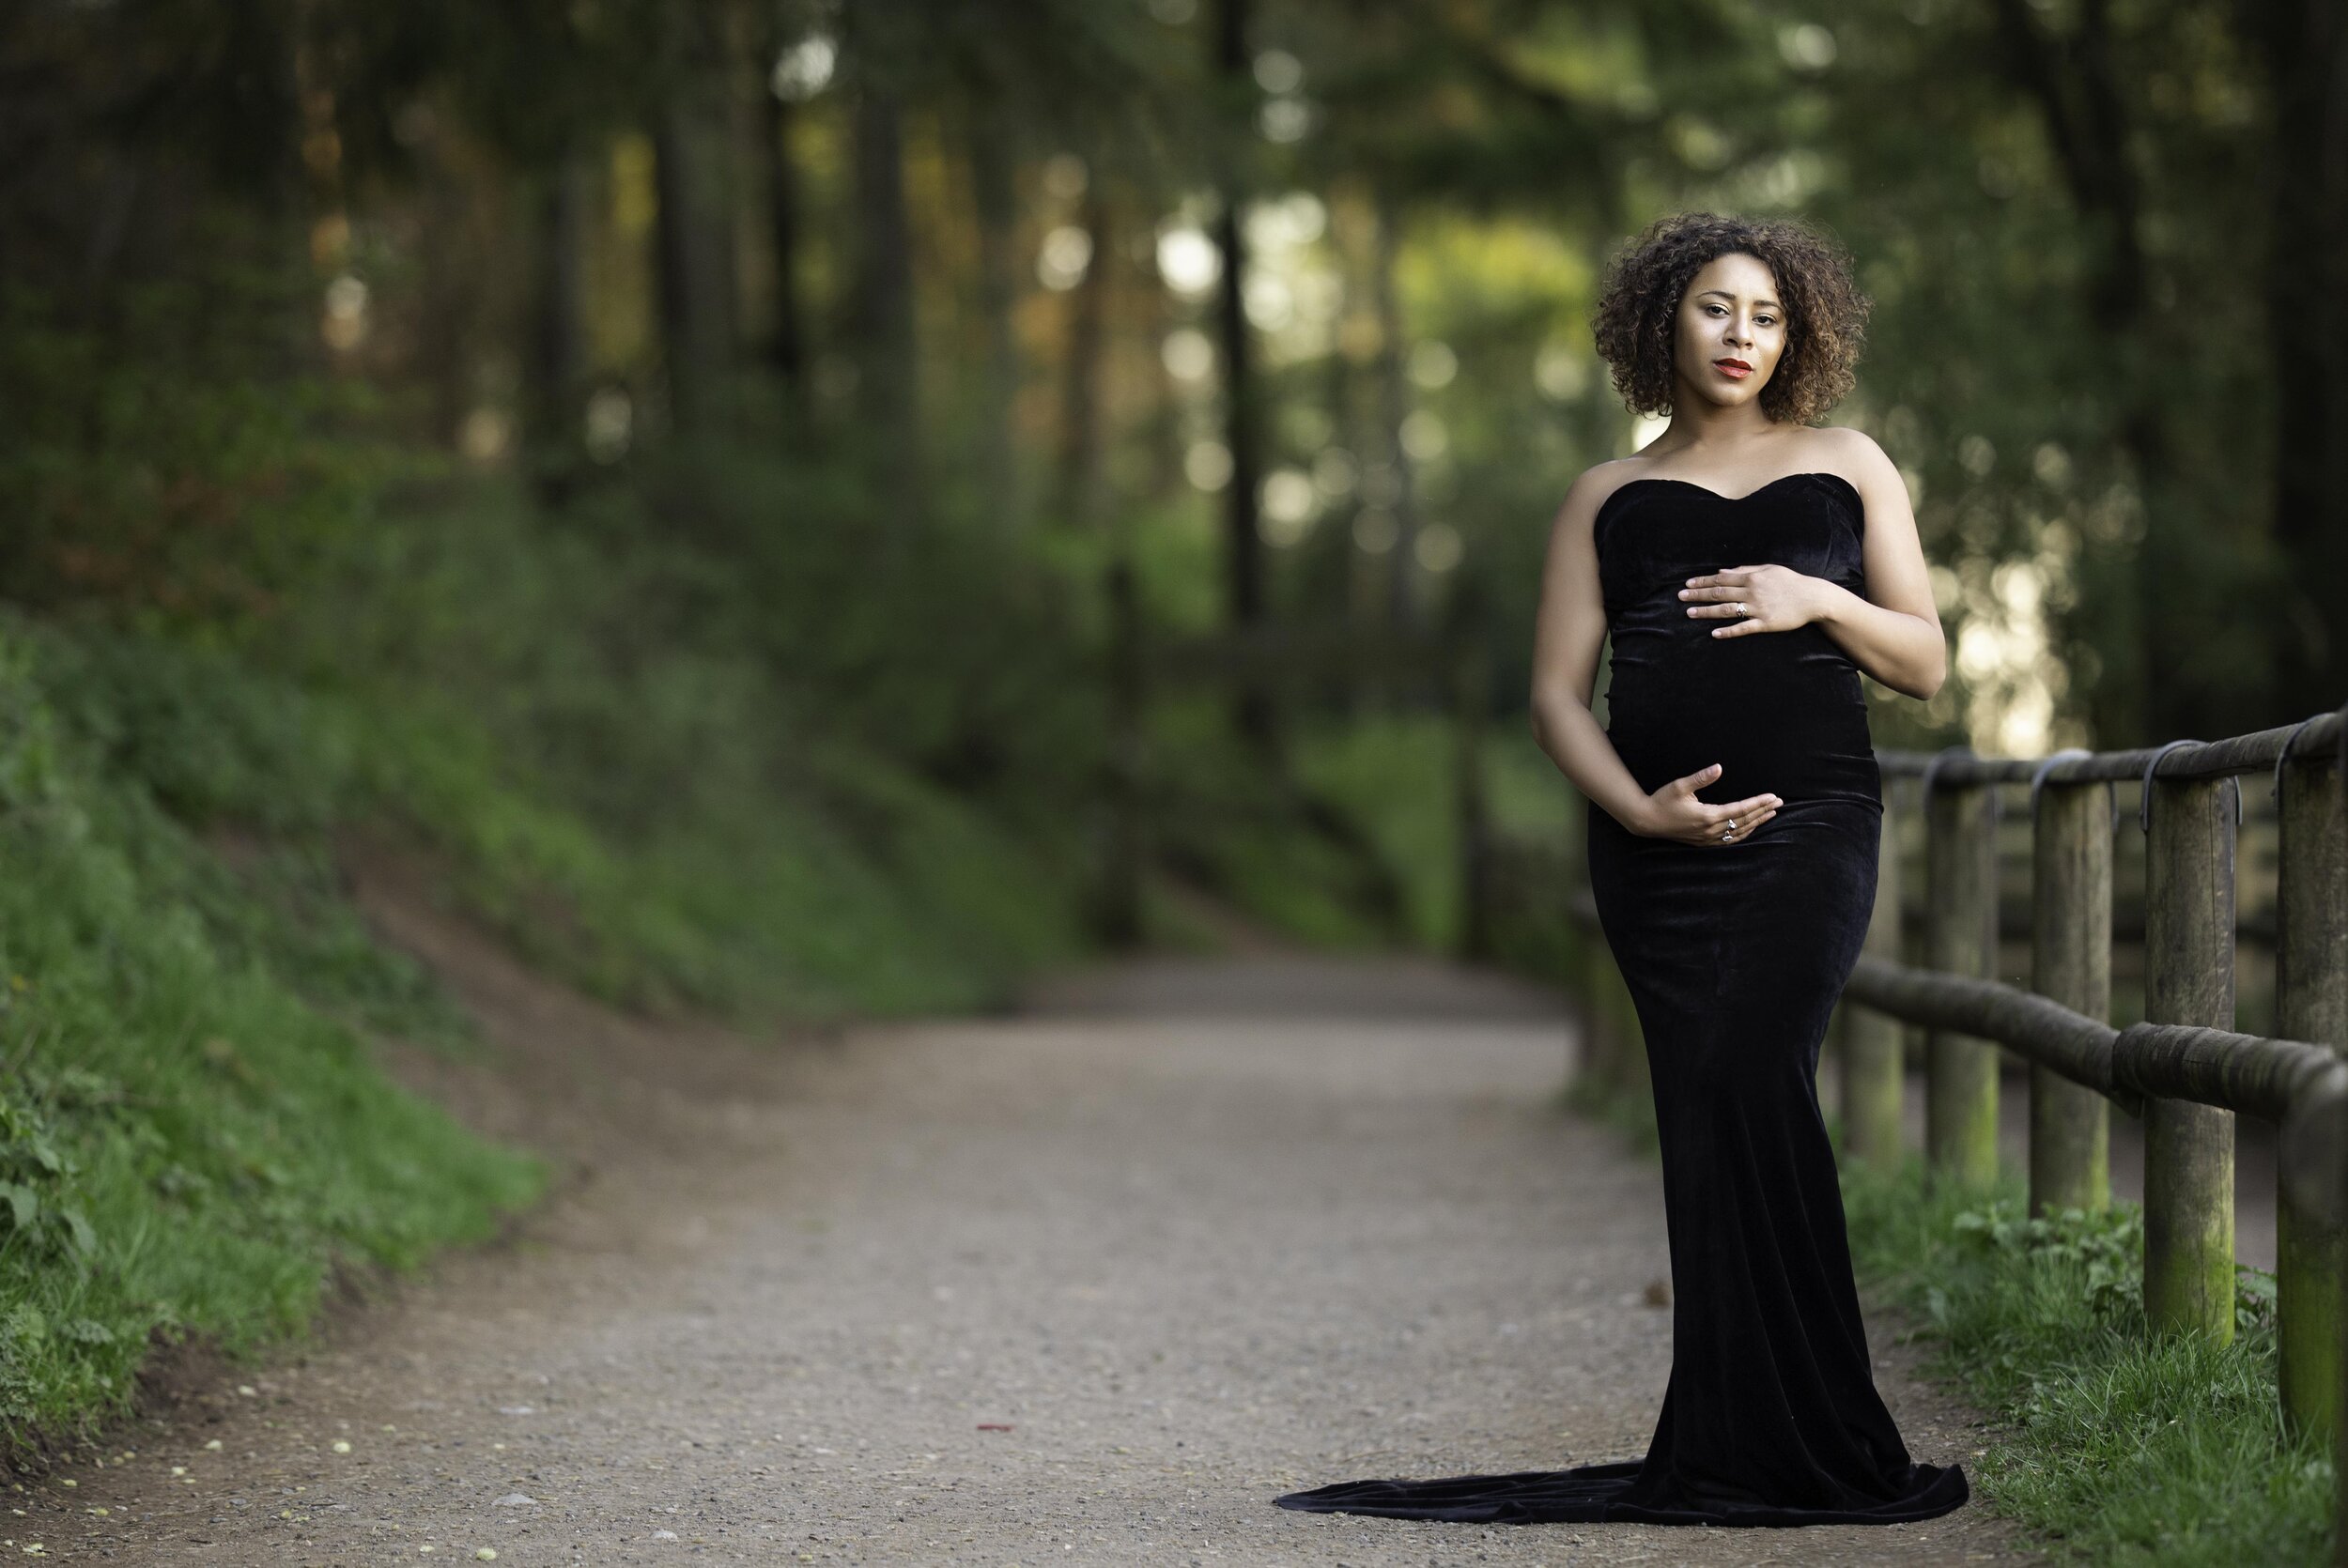 outdoors-maternity-photography-willenhall-wolverhampton-lea-cooper-photography-west-midlands-black-dress.jpg